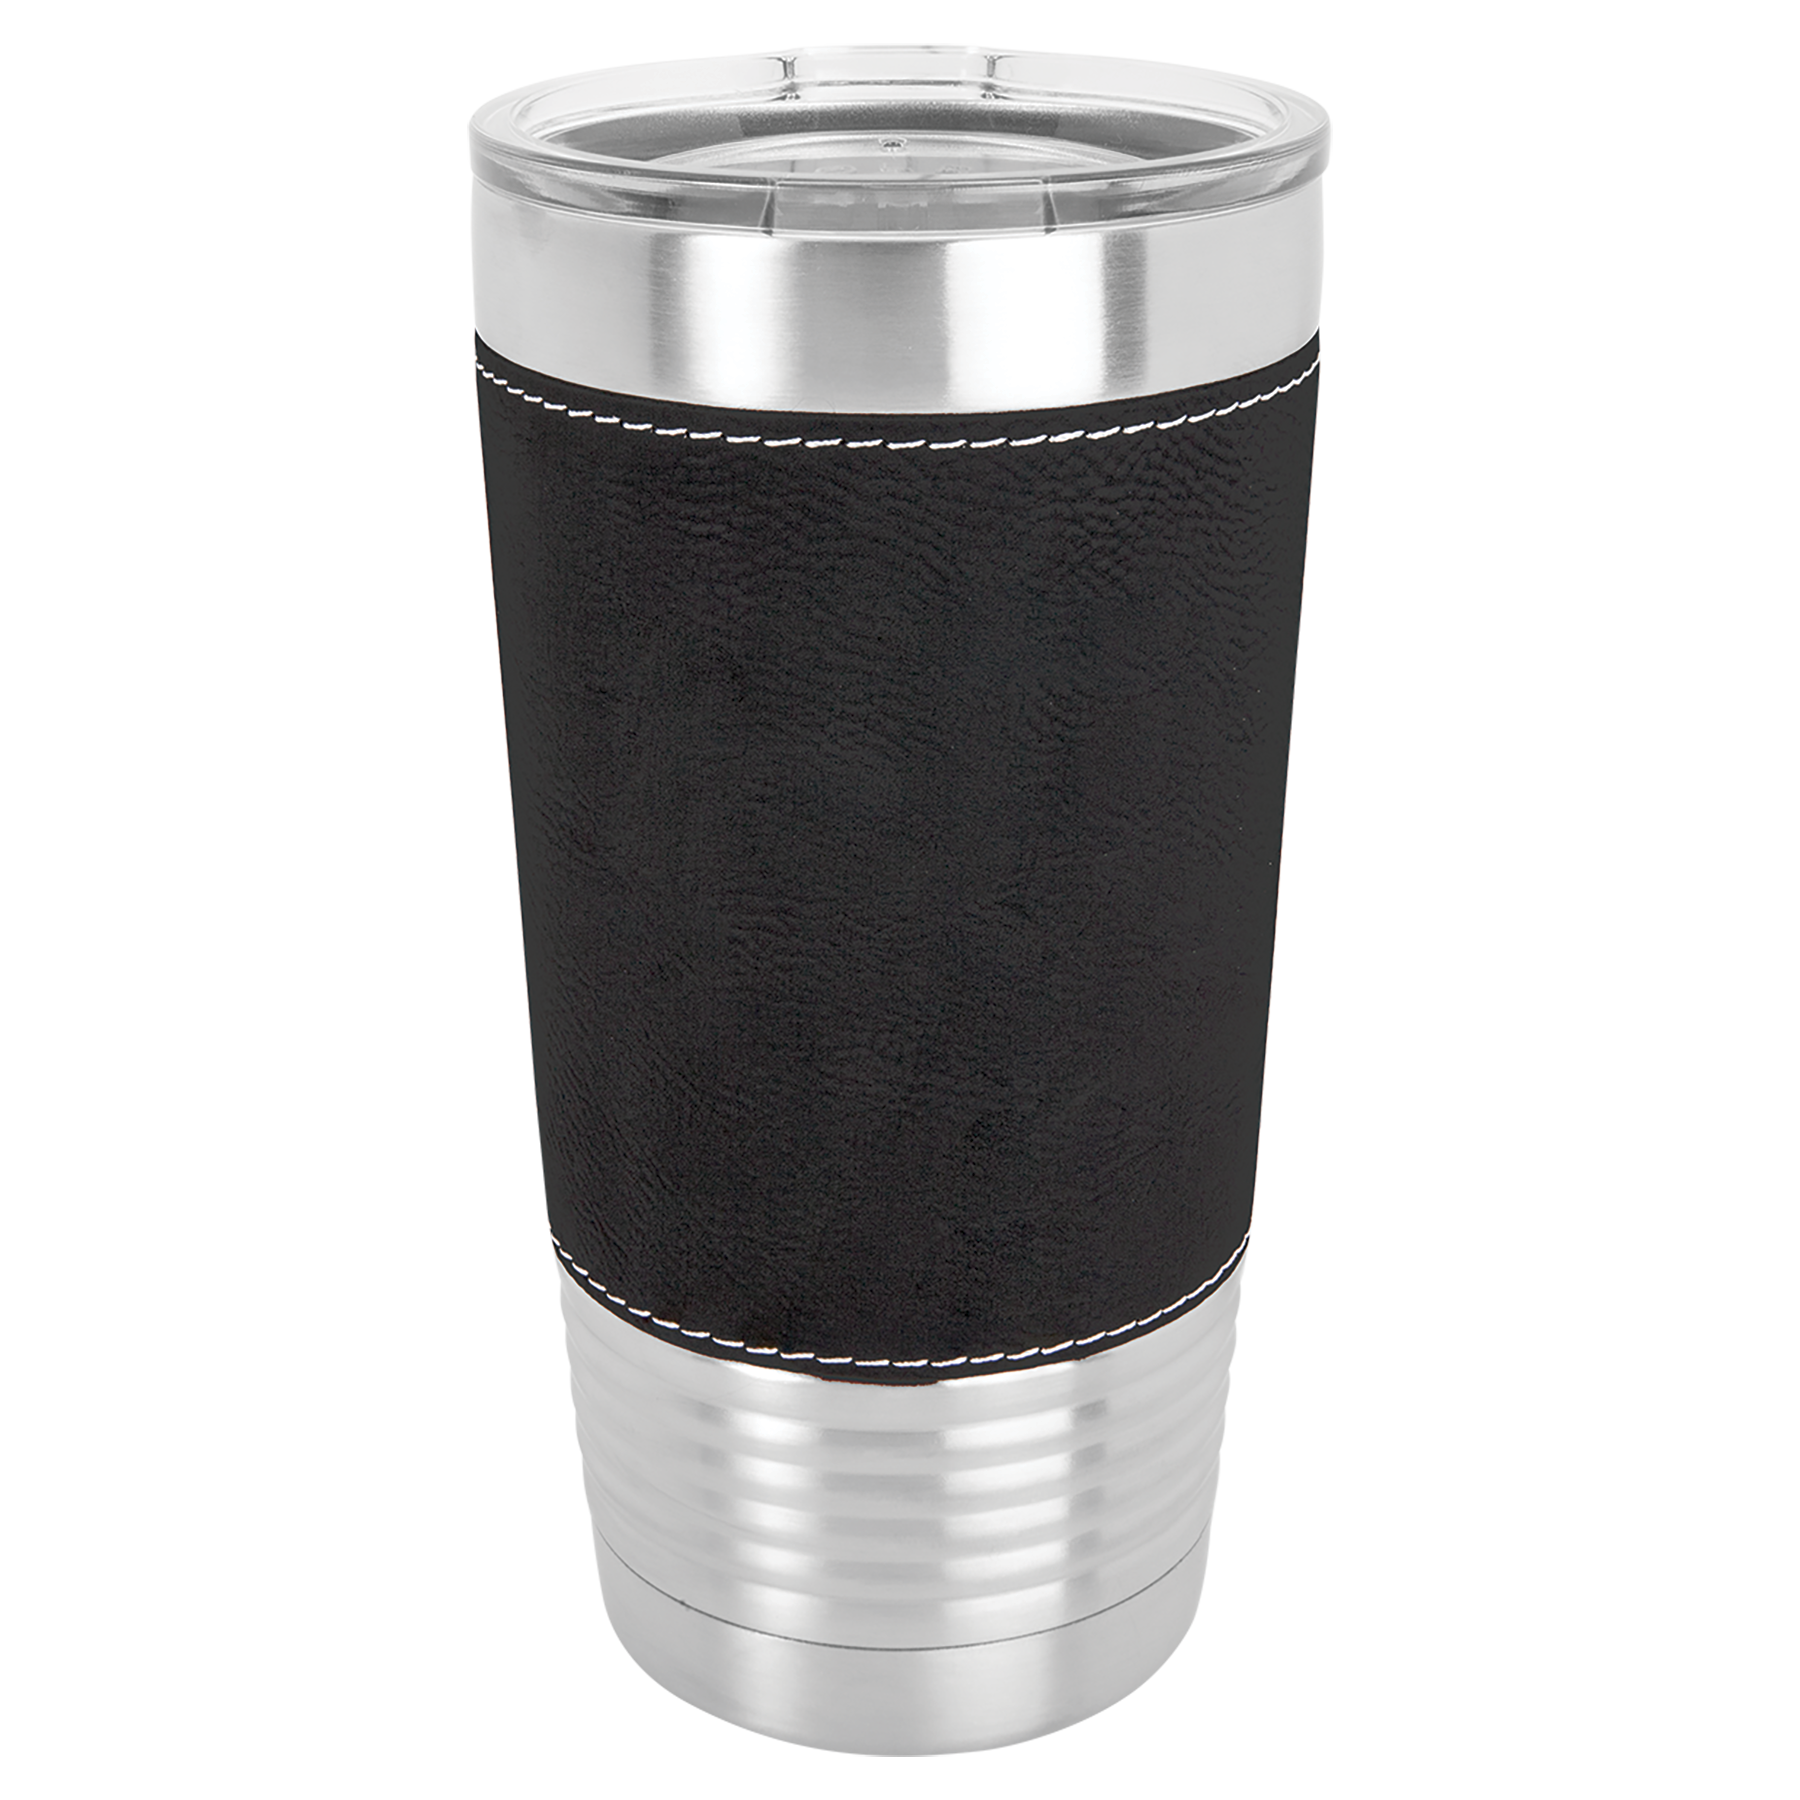 Black Leatherette Engraves to Silver 20oz Tumbler -One Free Engraving   -Double-wall Vacuum Insulated  -Made from 18/8 Gauge Stainless Steel (Type 304 Food Grade)  -Lid is BPA Free (Hand Wash Only)  -Not recommended for Dishwasher  -Leatherette Not Removable  -Works with Cold and Hot Drinks  -10 Color Options  -Perfect for Personalized Gifts, Awards, Incentives, Swag & Fundraisers